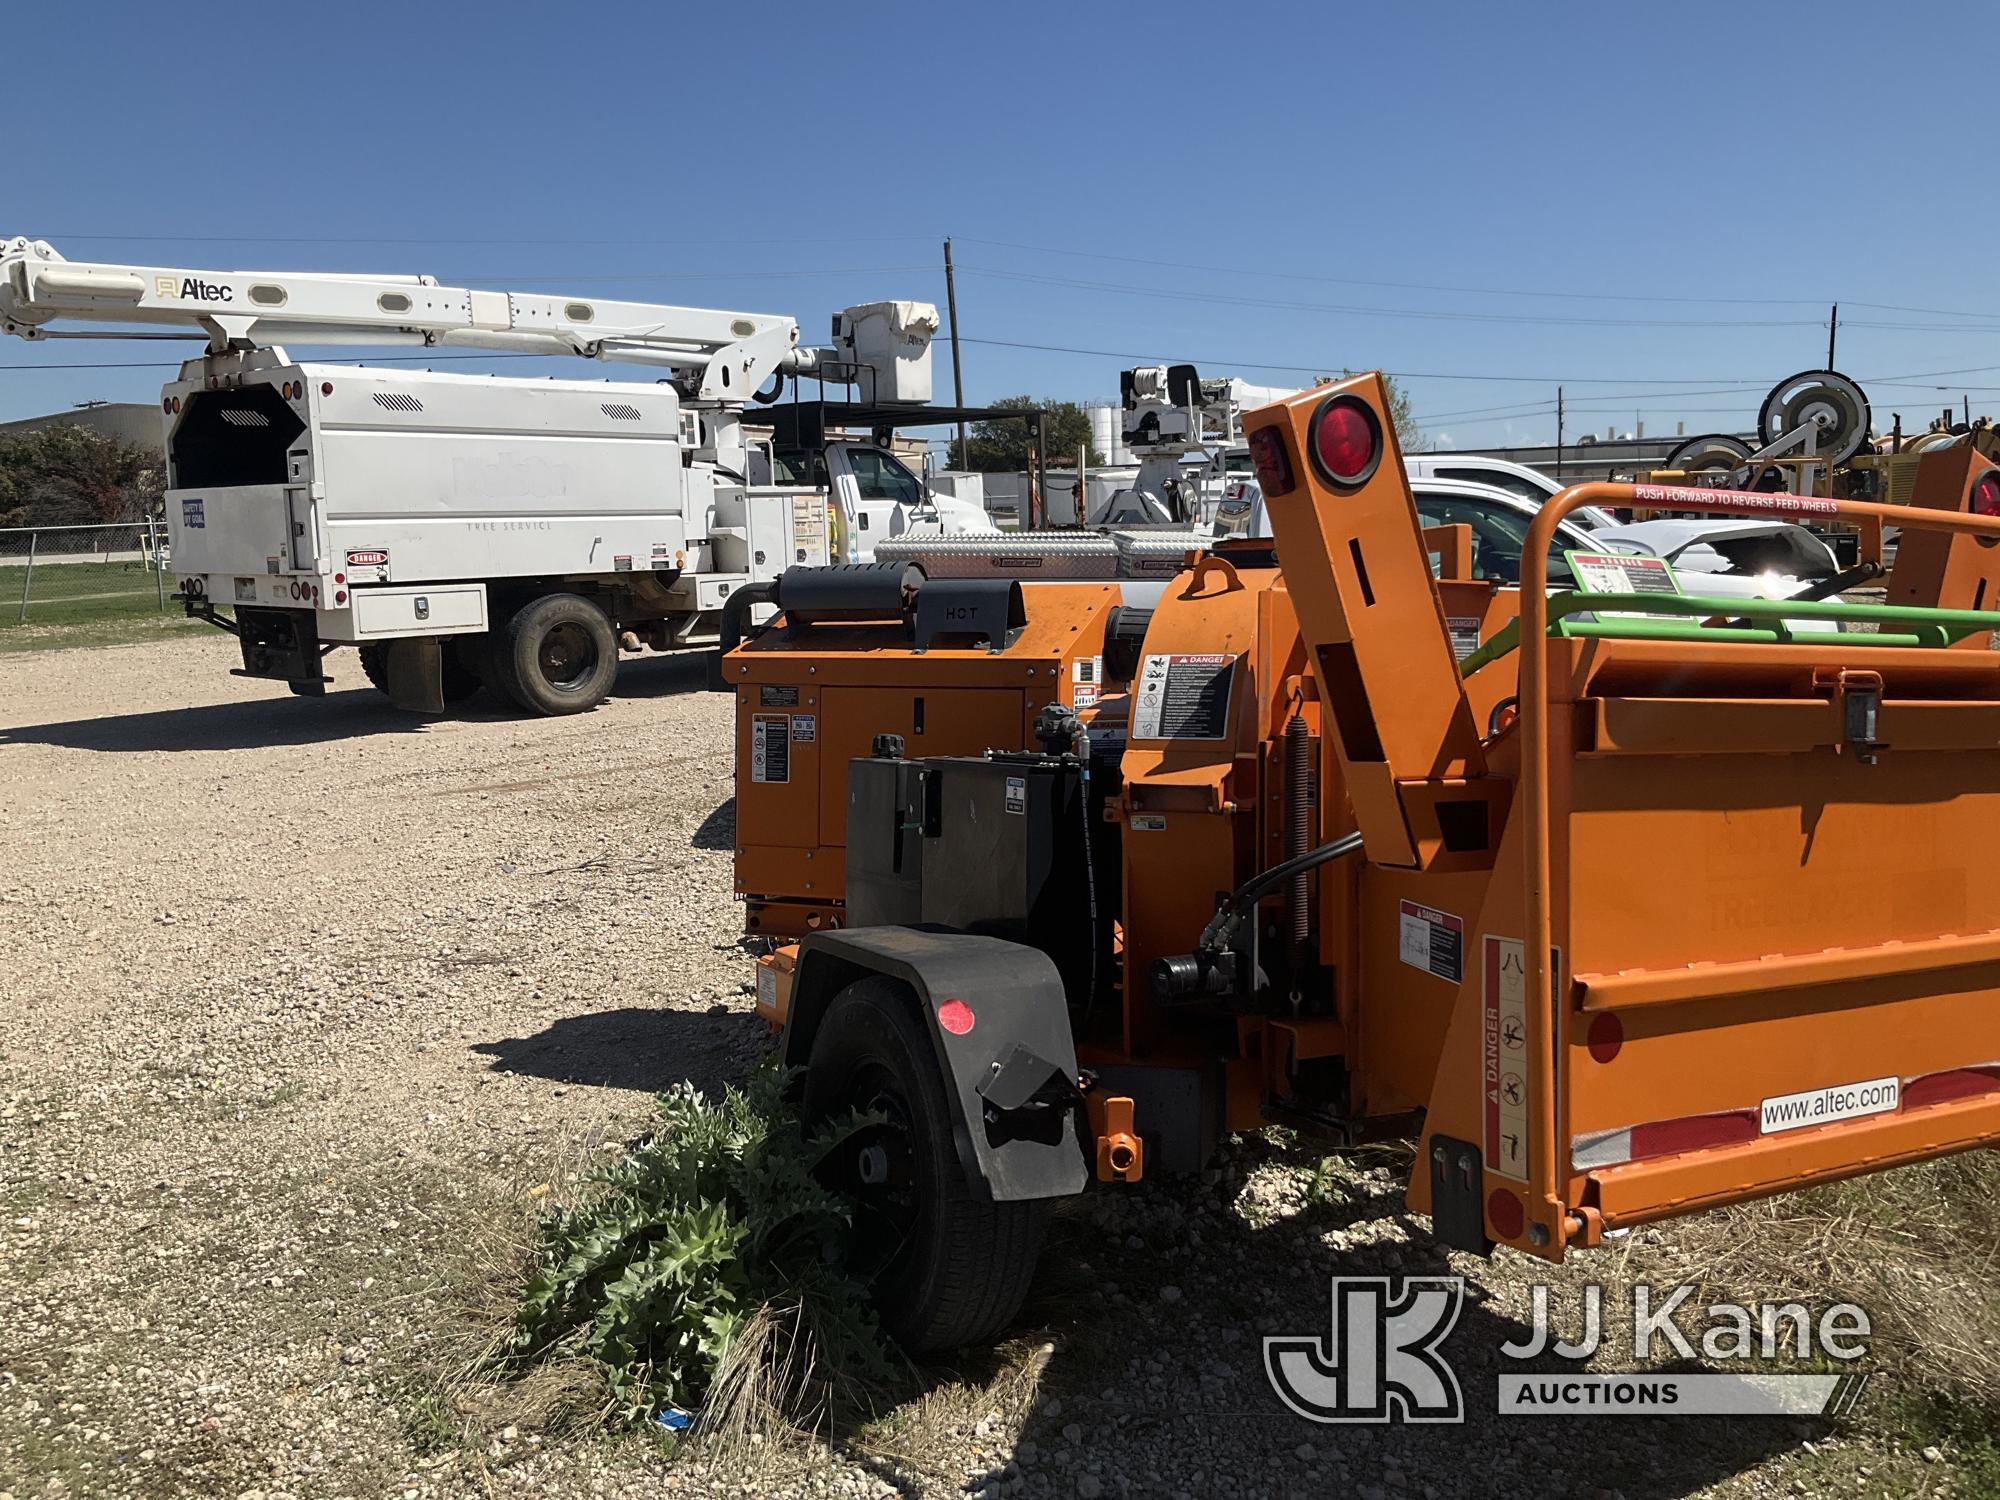 (Waxahachie, TX) 2015 Altec DC1317 Chipper (13in Disc) No Title) (Not Running, Condition Unknown